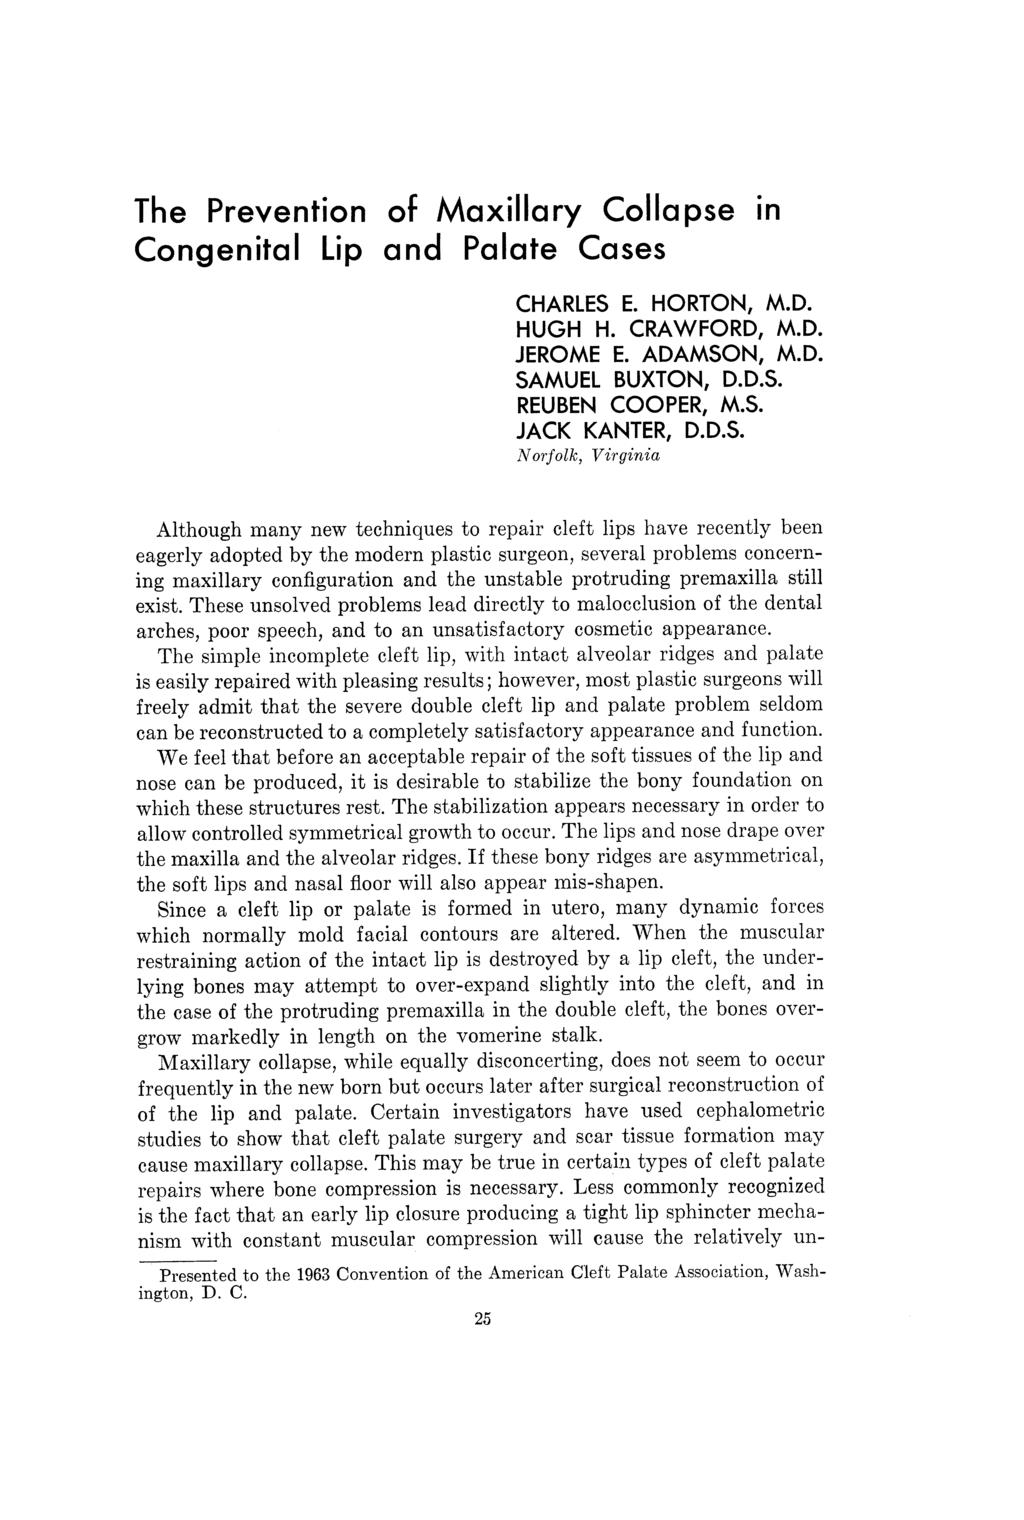 The Prevention of Maxillary Collapse in Congenital Lip and Palate Cases CHARLES E. HUGH H. JEROME E. HORTON, M.D. CRAWFORD, M.D. ADAMSON, M.D. SAMUEL BUXTON, D.D.S. REUBEN COOPER, M.S. JACK KANTER, D.